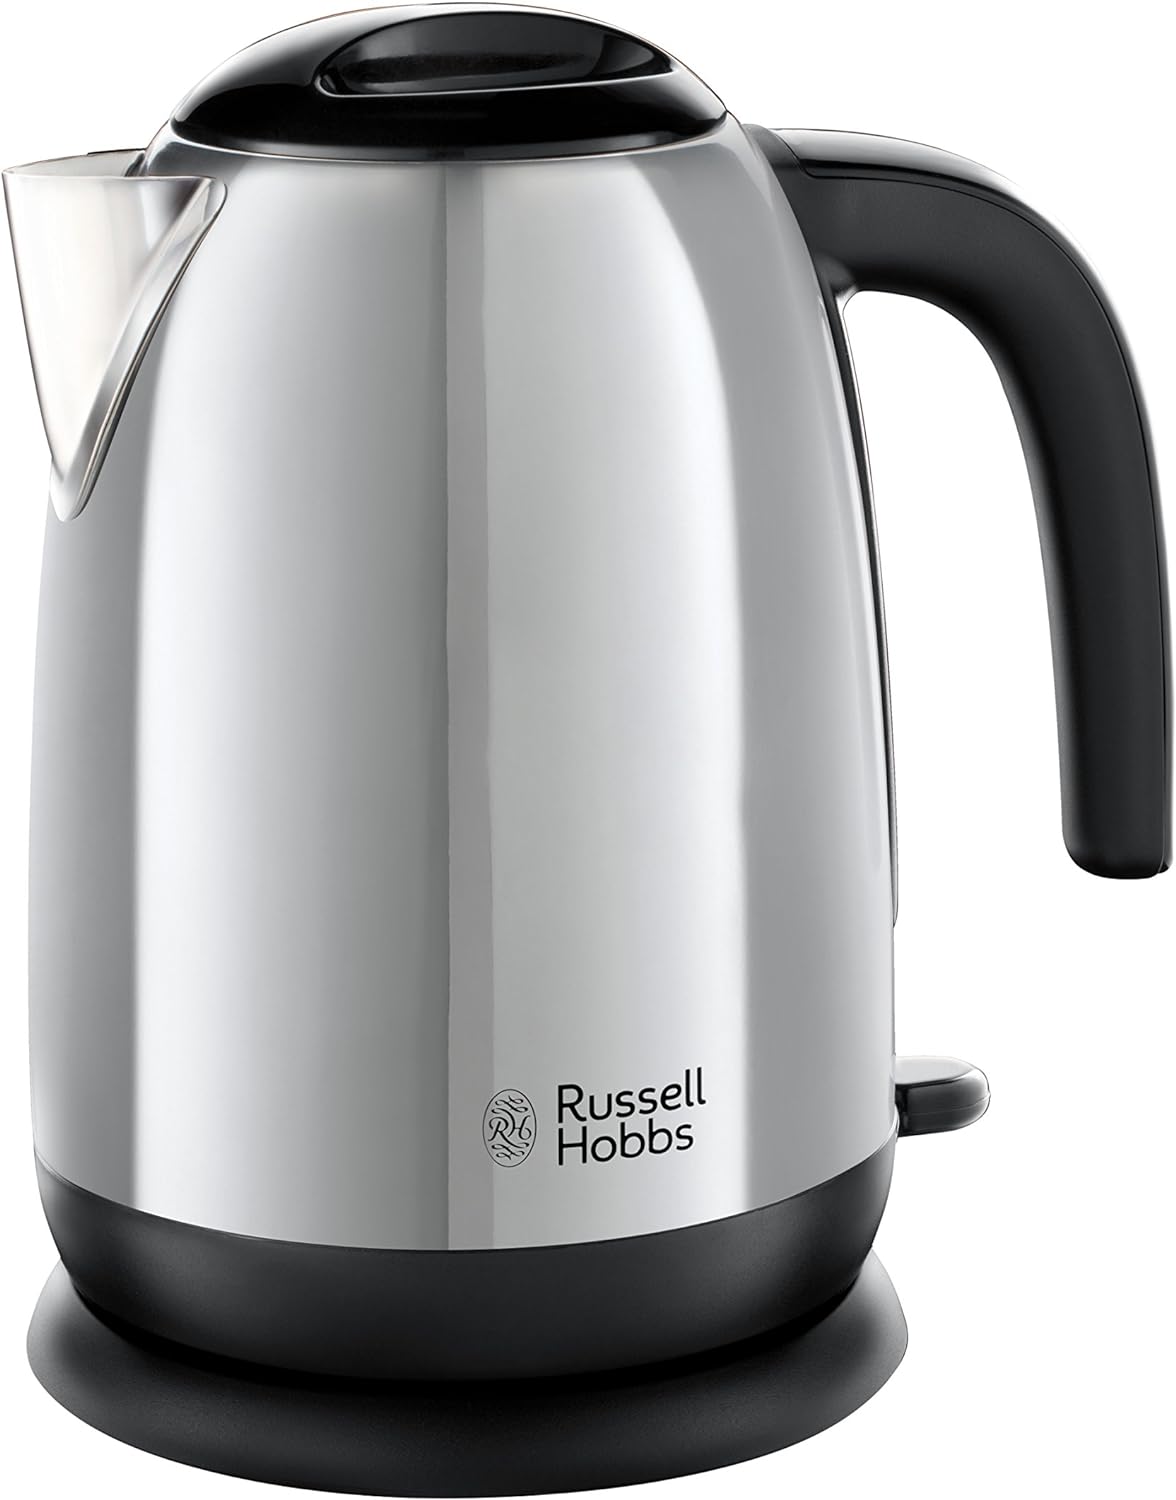 Russell Hobbs Stainless Steel & Black Electric 1.7L Cordless Kettle with black handle (Fast Boil 3KW, Removable washable anti - scale filter, Pull off lid, Perfect pour spout) 23911 - Amazing Gadgets Outlet